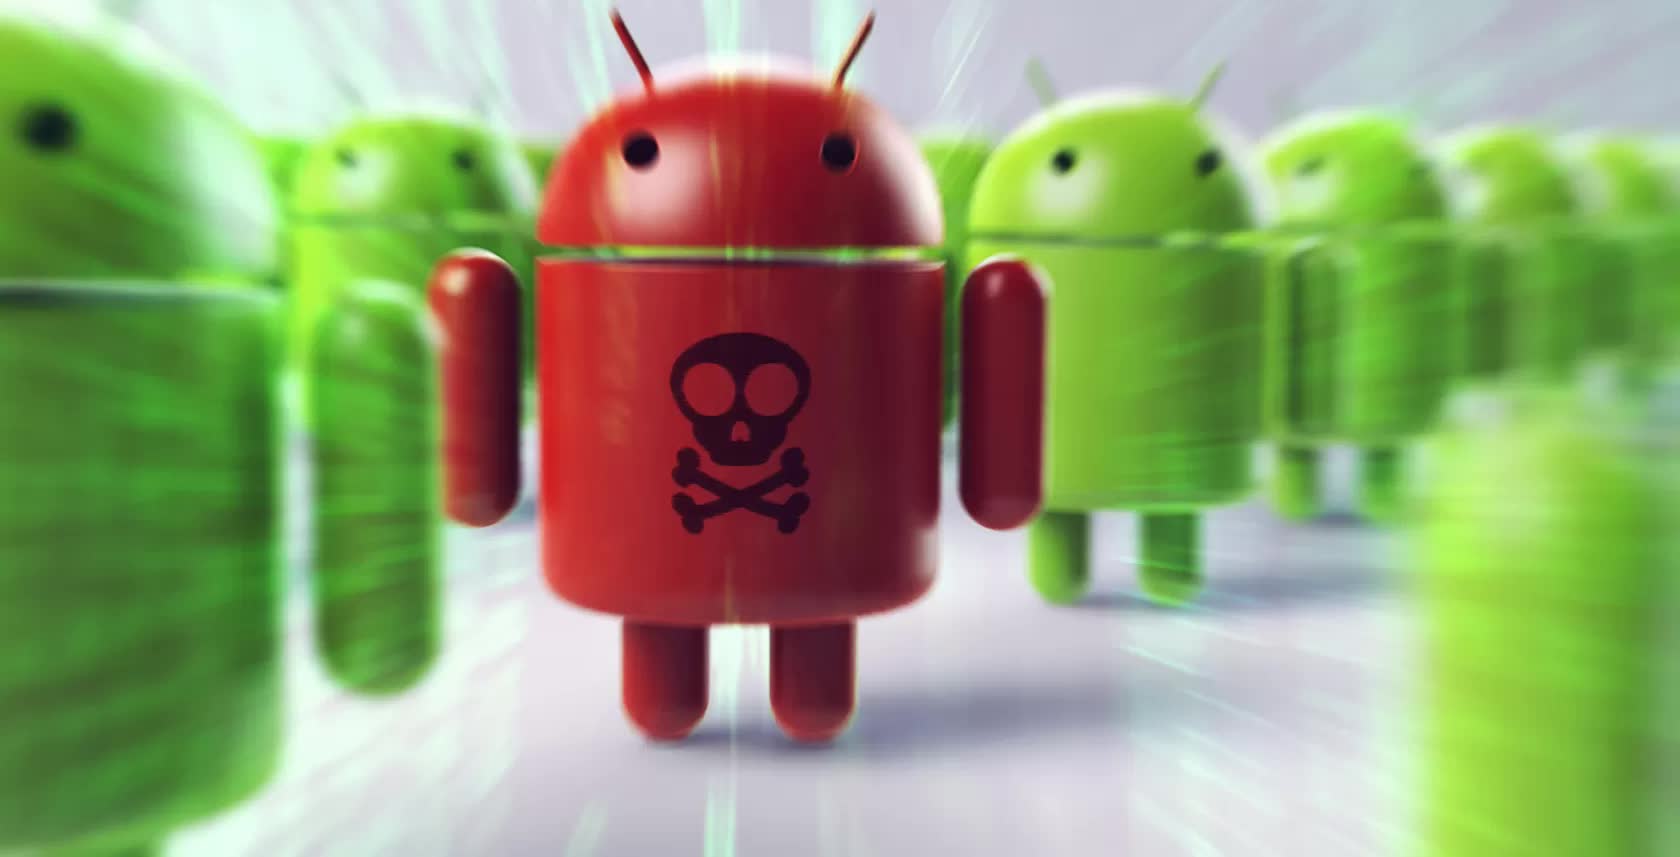 Trend Micro found several security flaws in the Android version of ShareIt